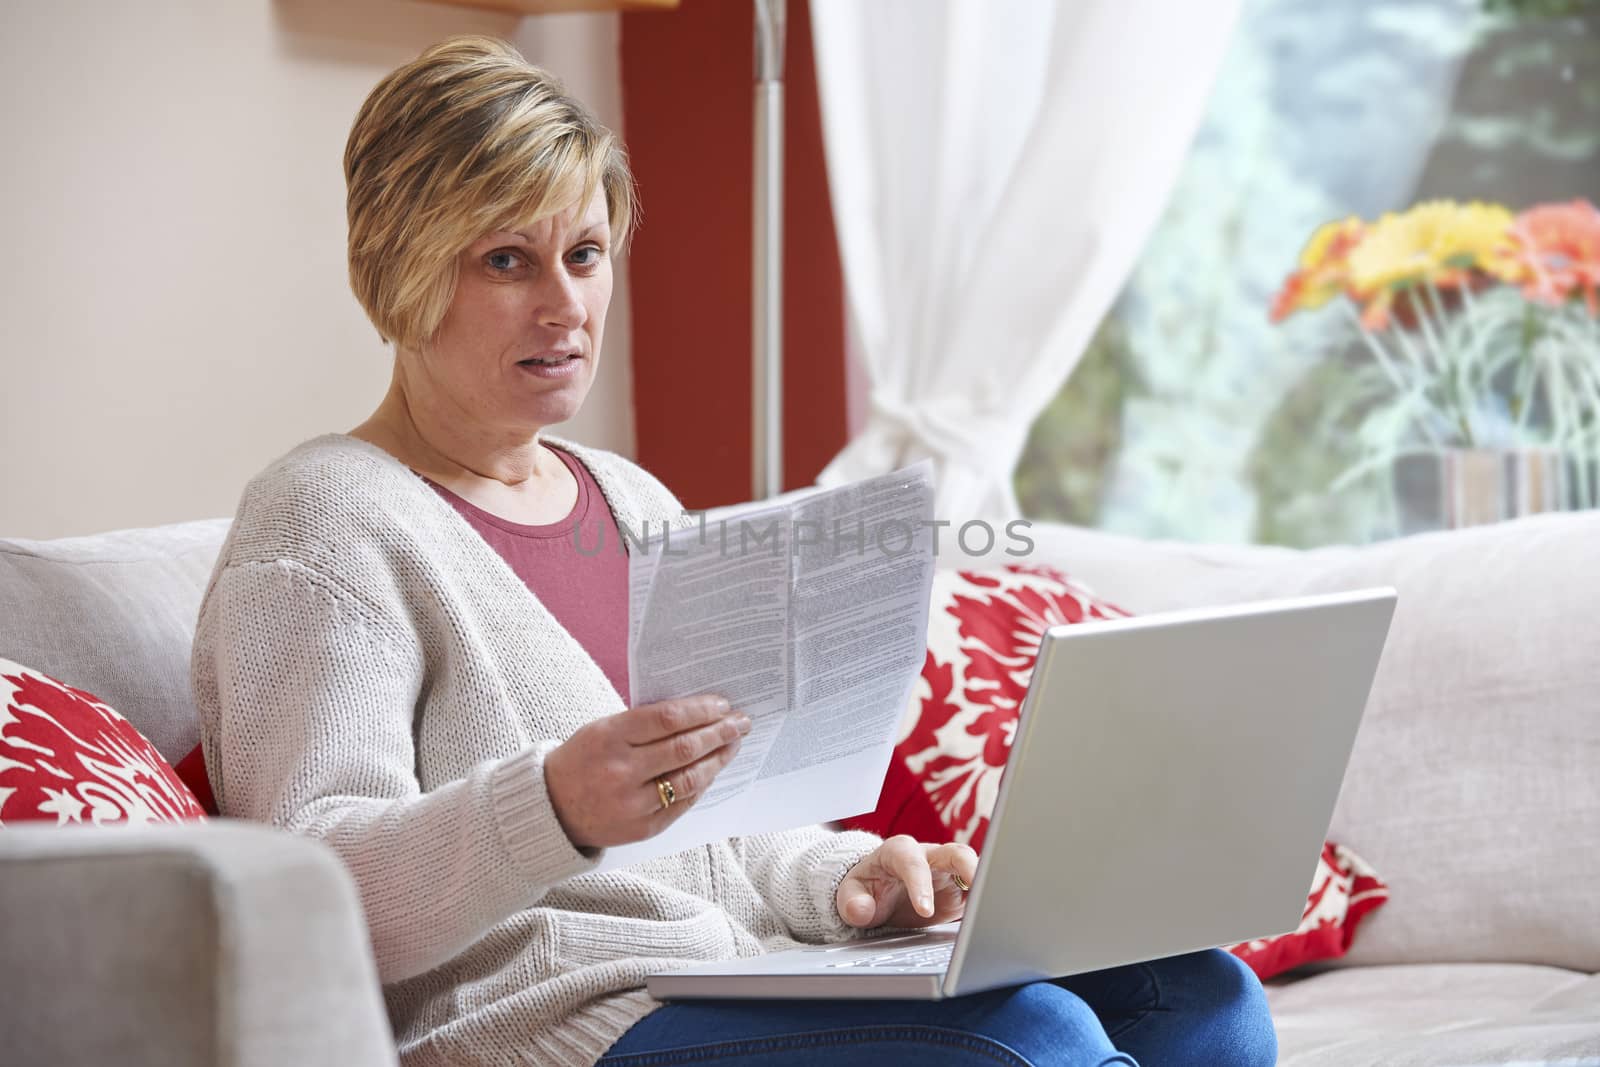  Woman sitting at home with laptop looking worried at camera while holding a bill